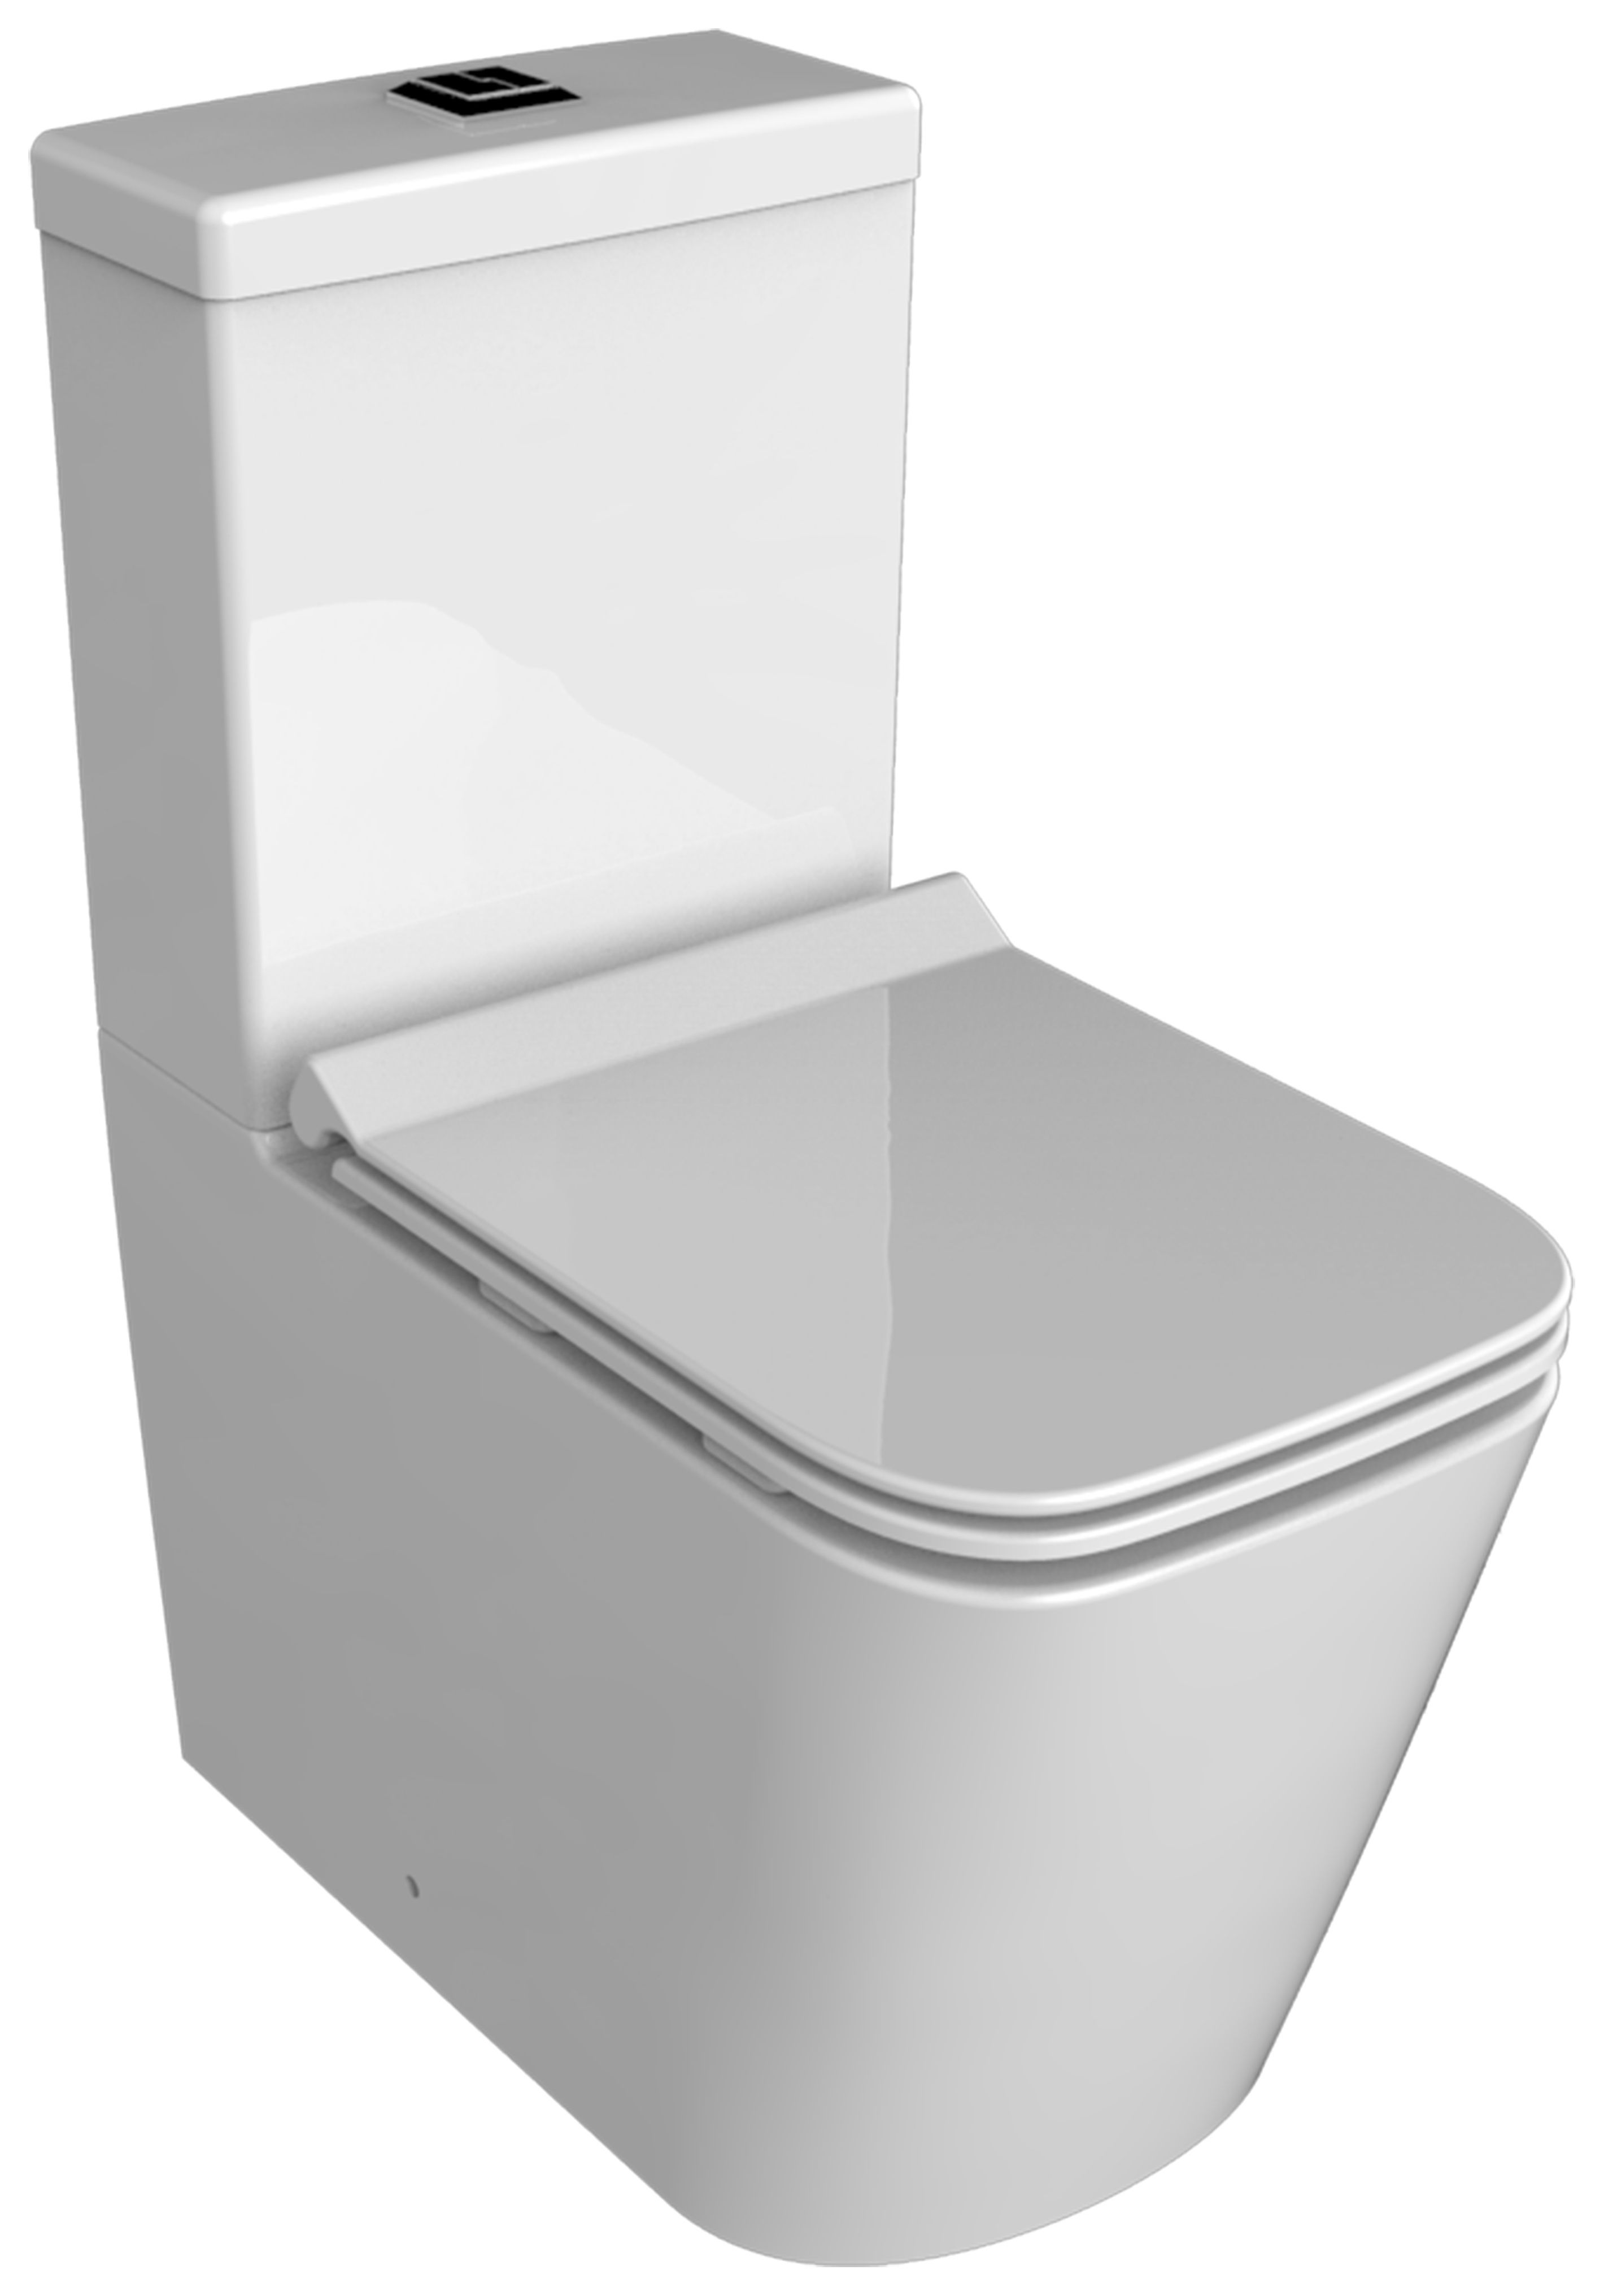 Wickes Meleti Easy Clean Close Coupled Fully Shrouded Toilet Pan, Cistern & Soft Close Slim Seat - 815 x 350mm